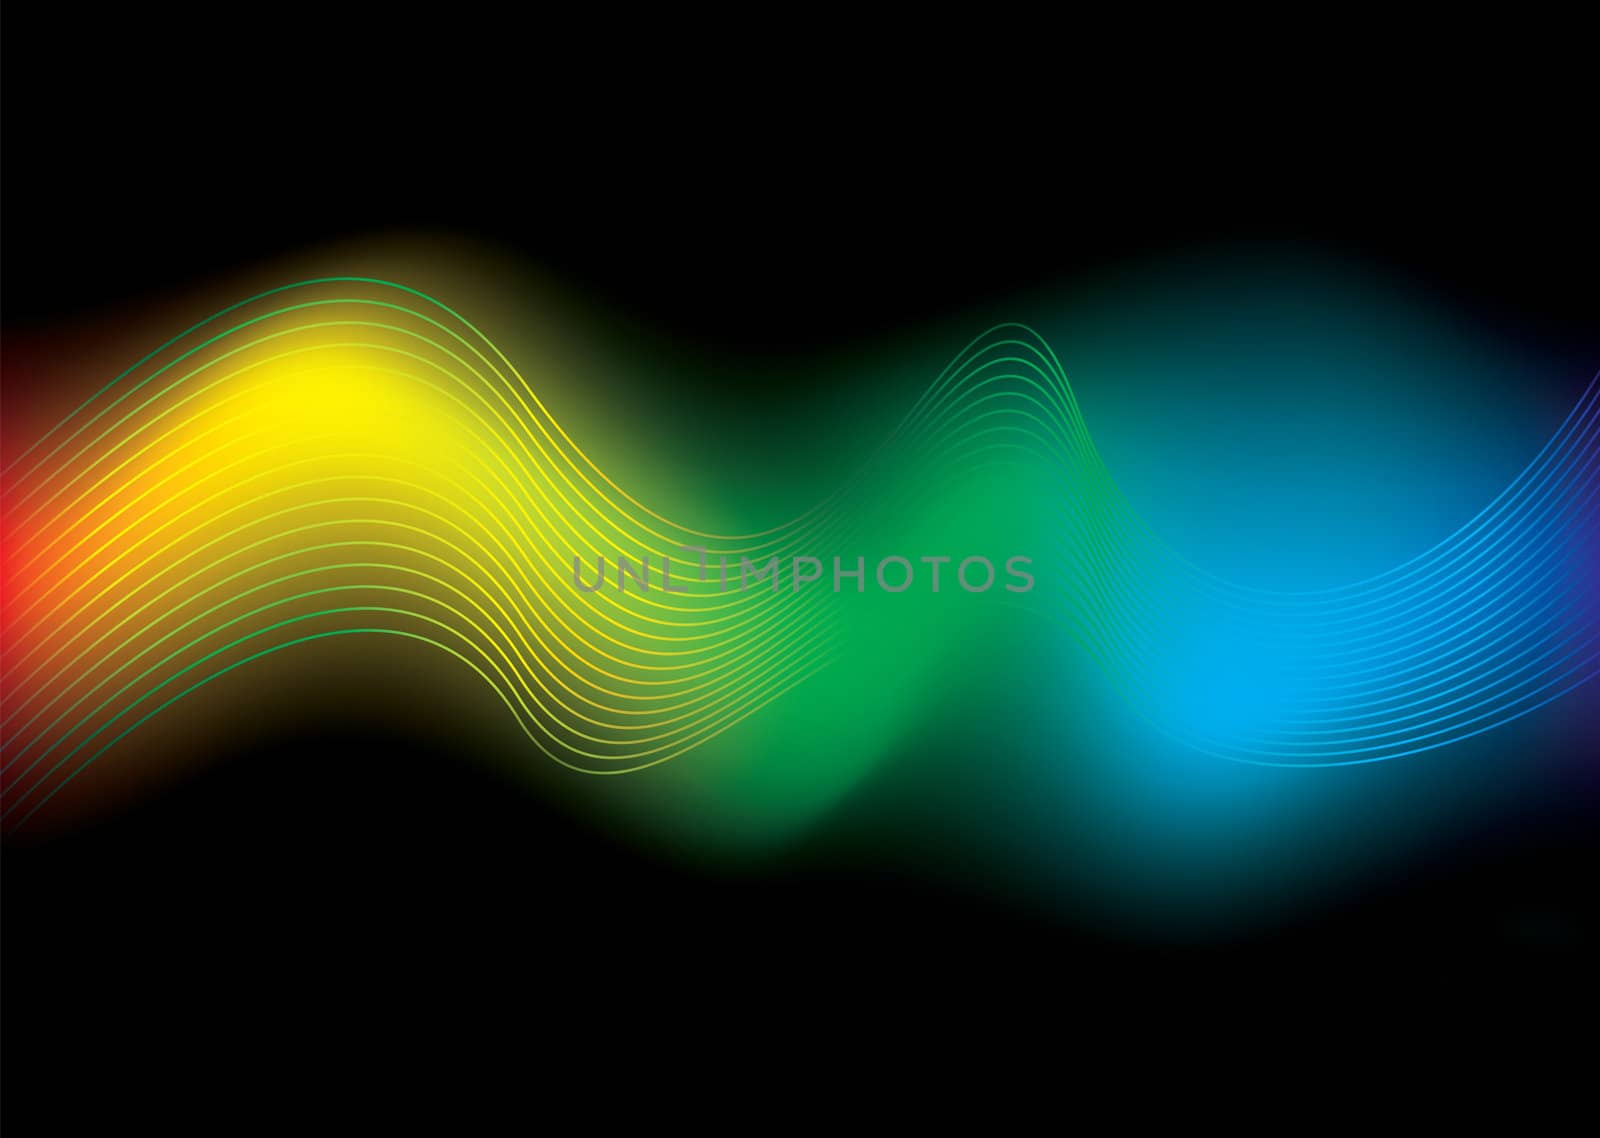 Brightly colored rainbow background with flowing wavy lines